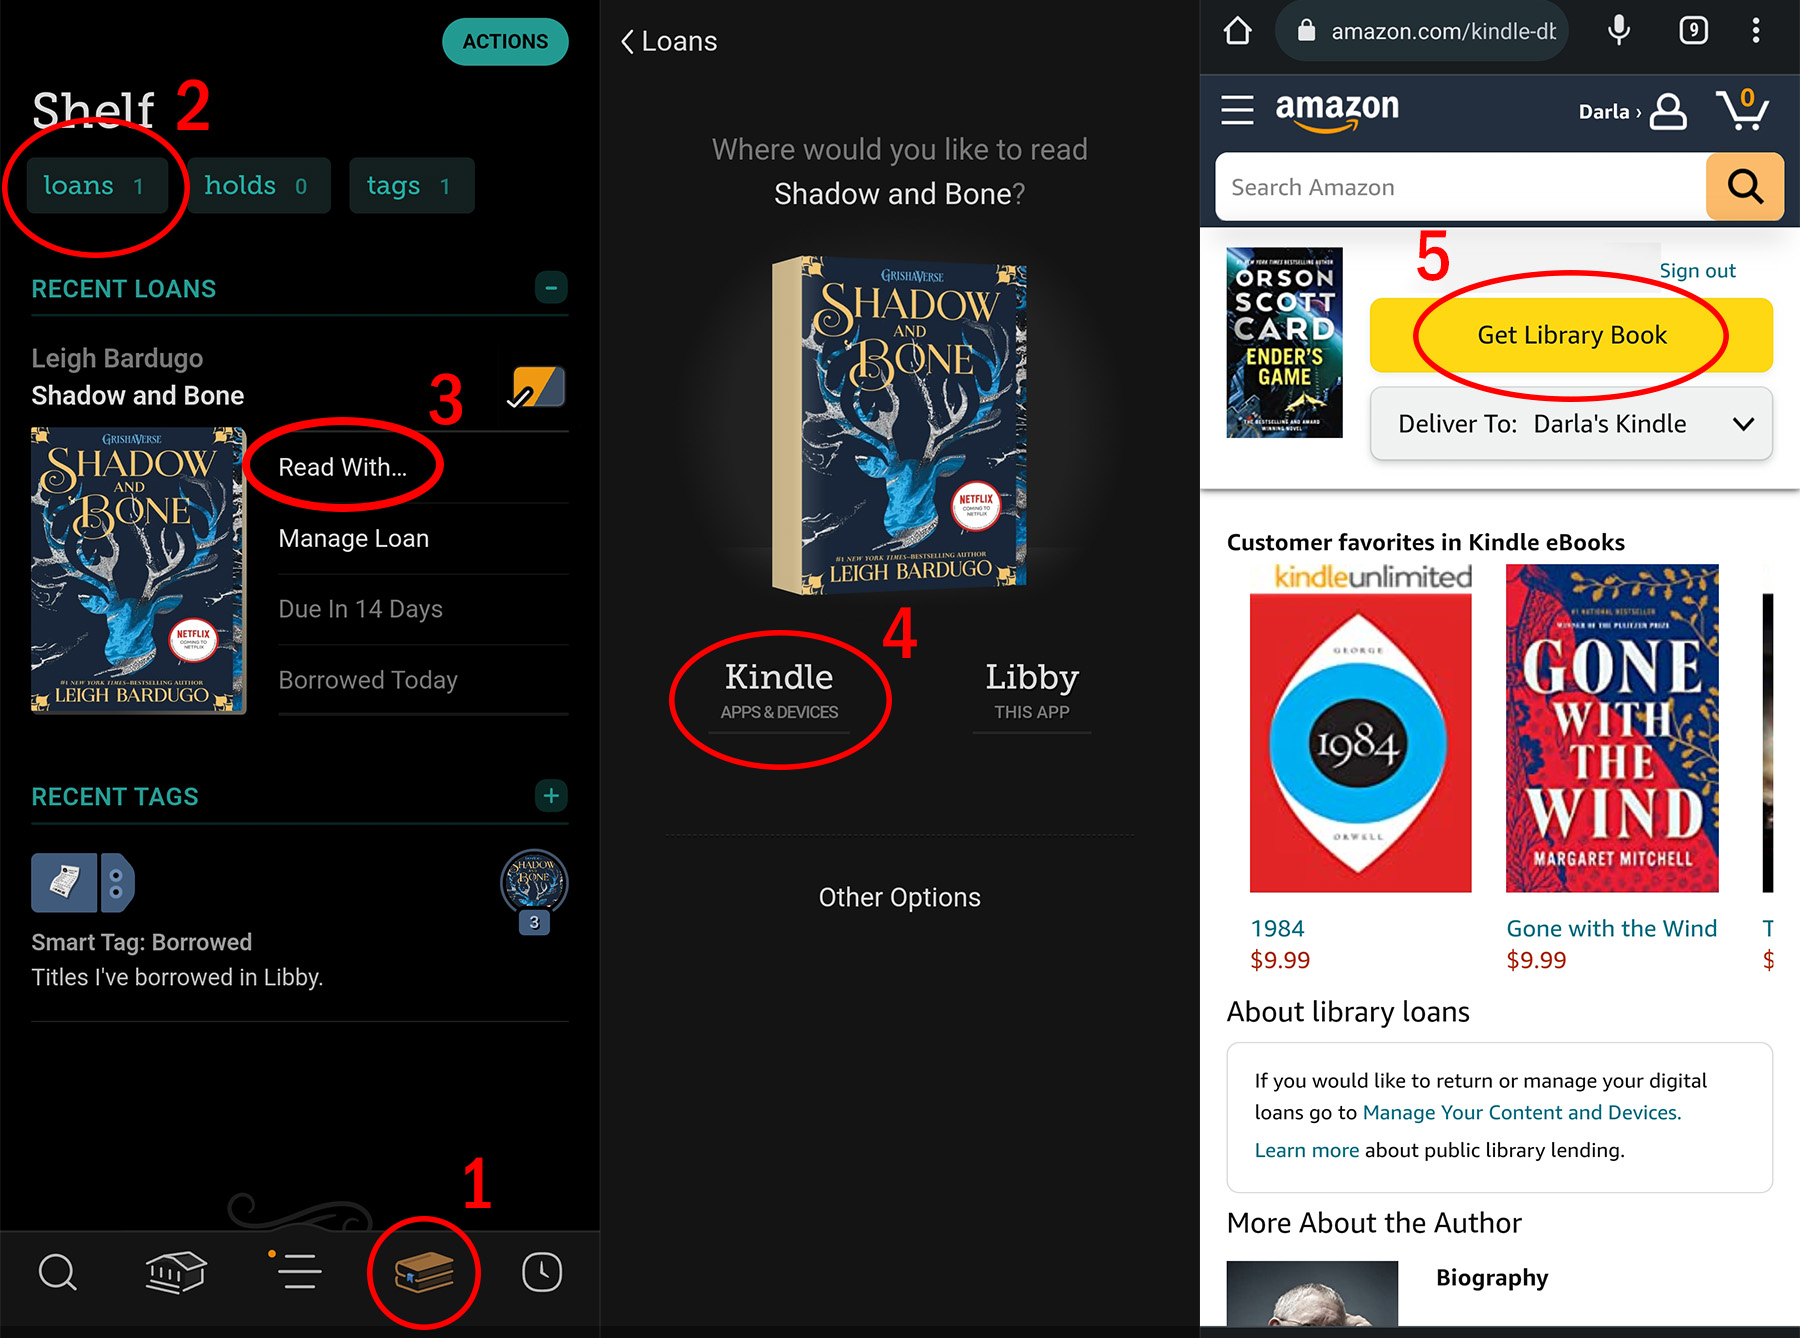 How to read a book on a Kindle from the Libby app